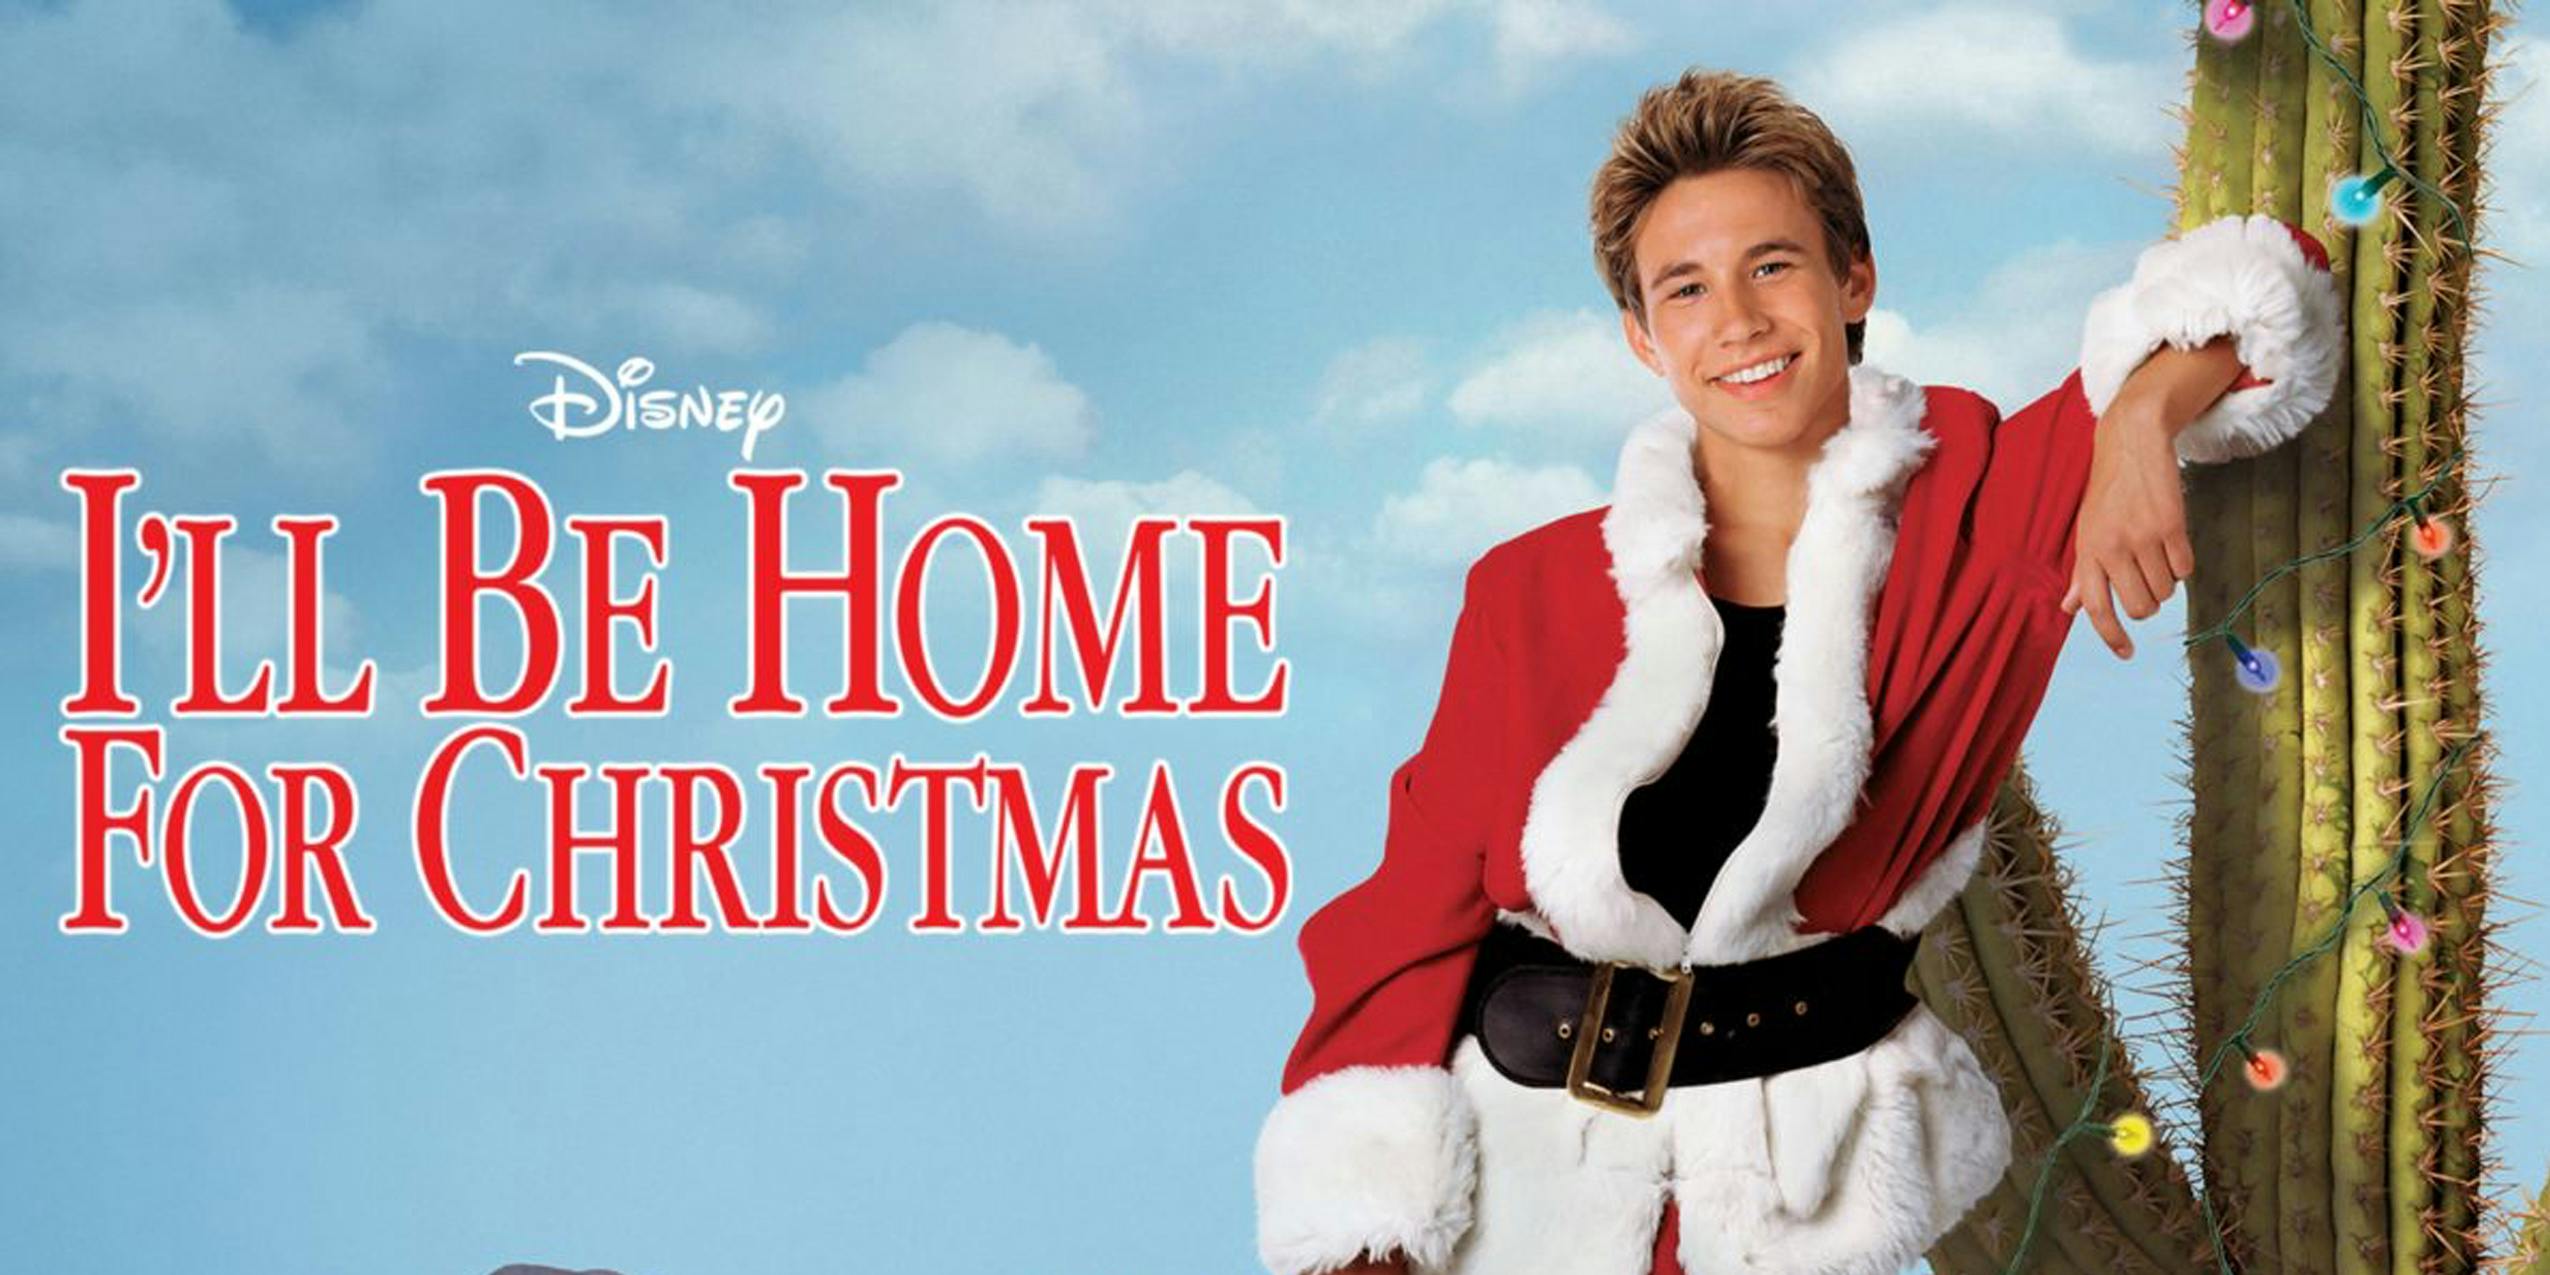 I'll be Home for Christmas movie poster featuring Jonathan Taylor Thomas.